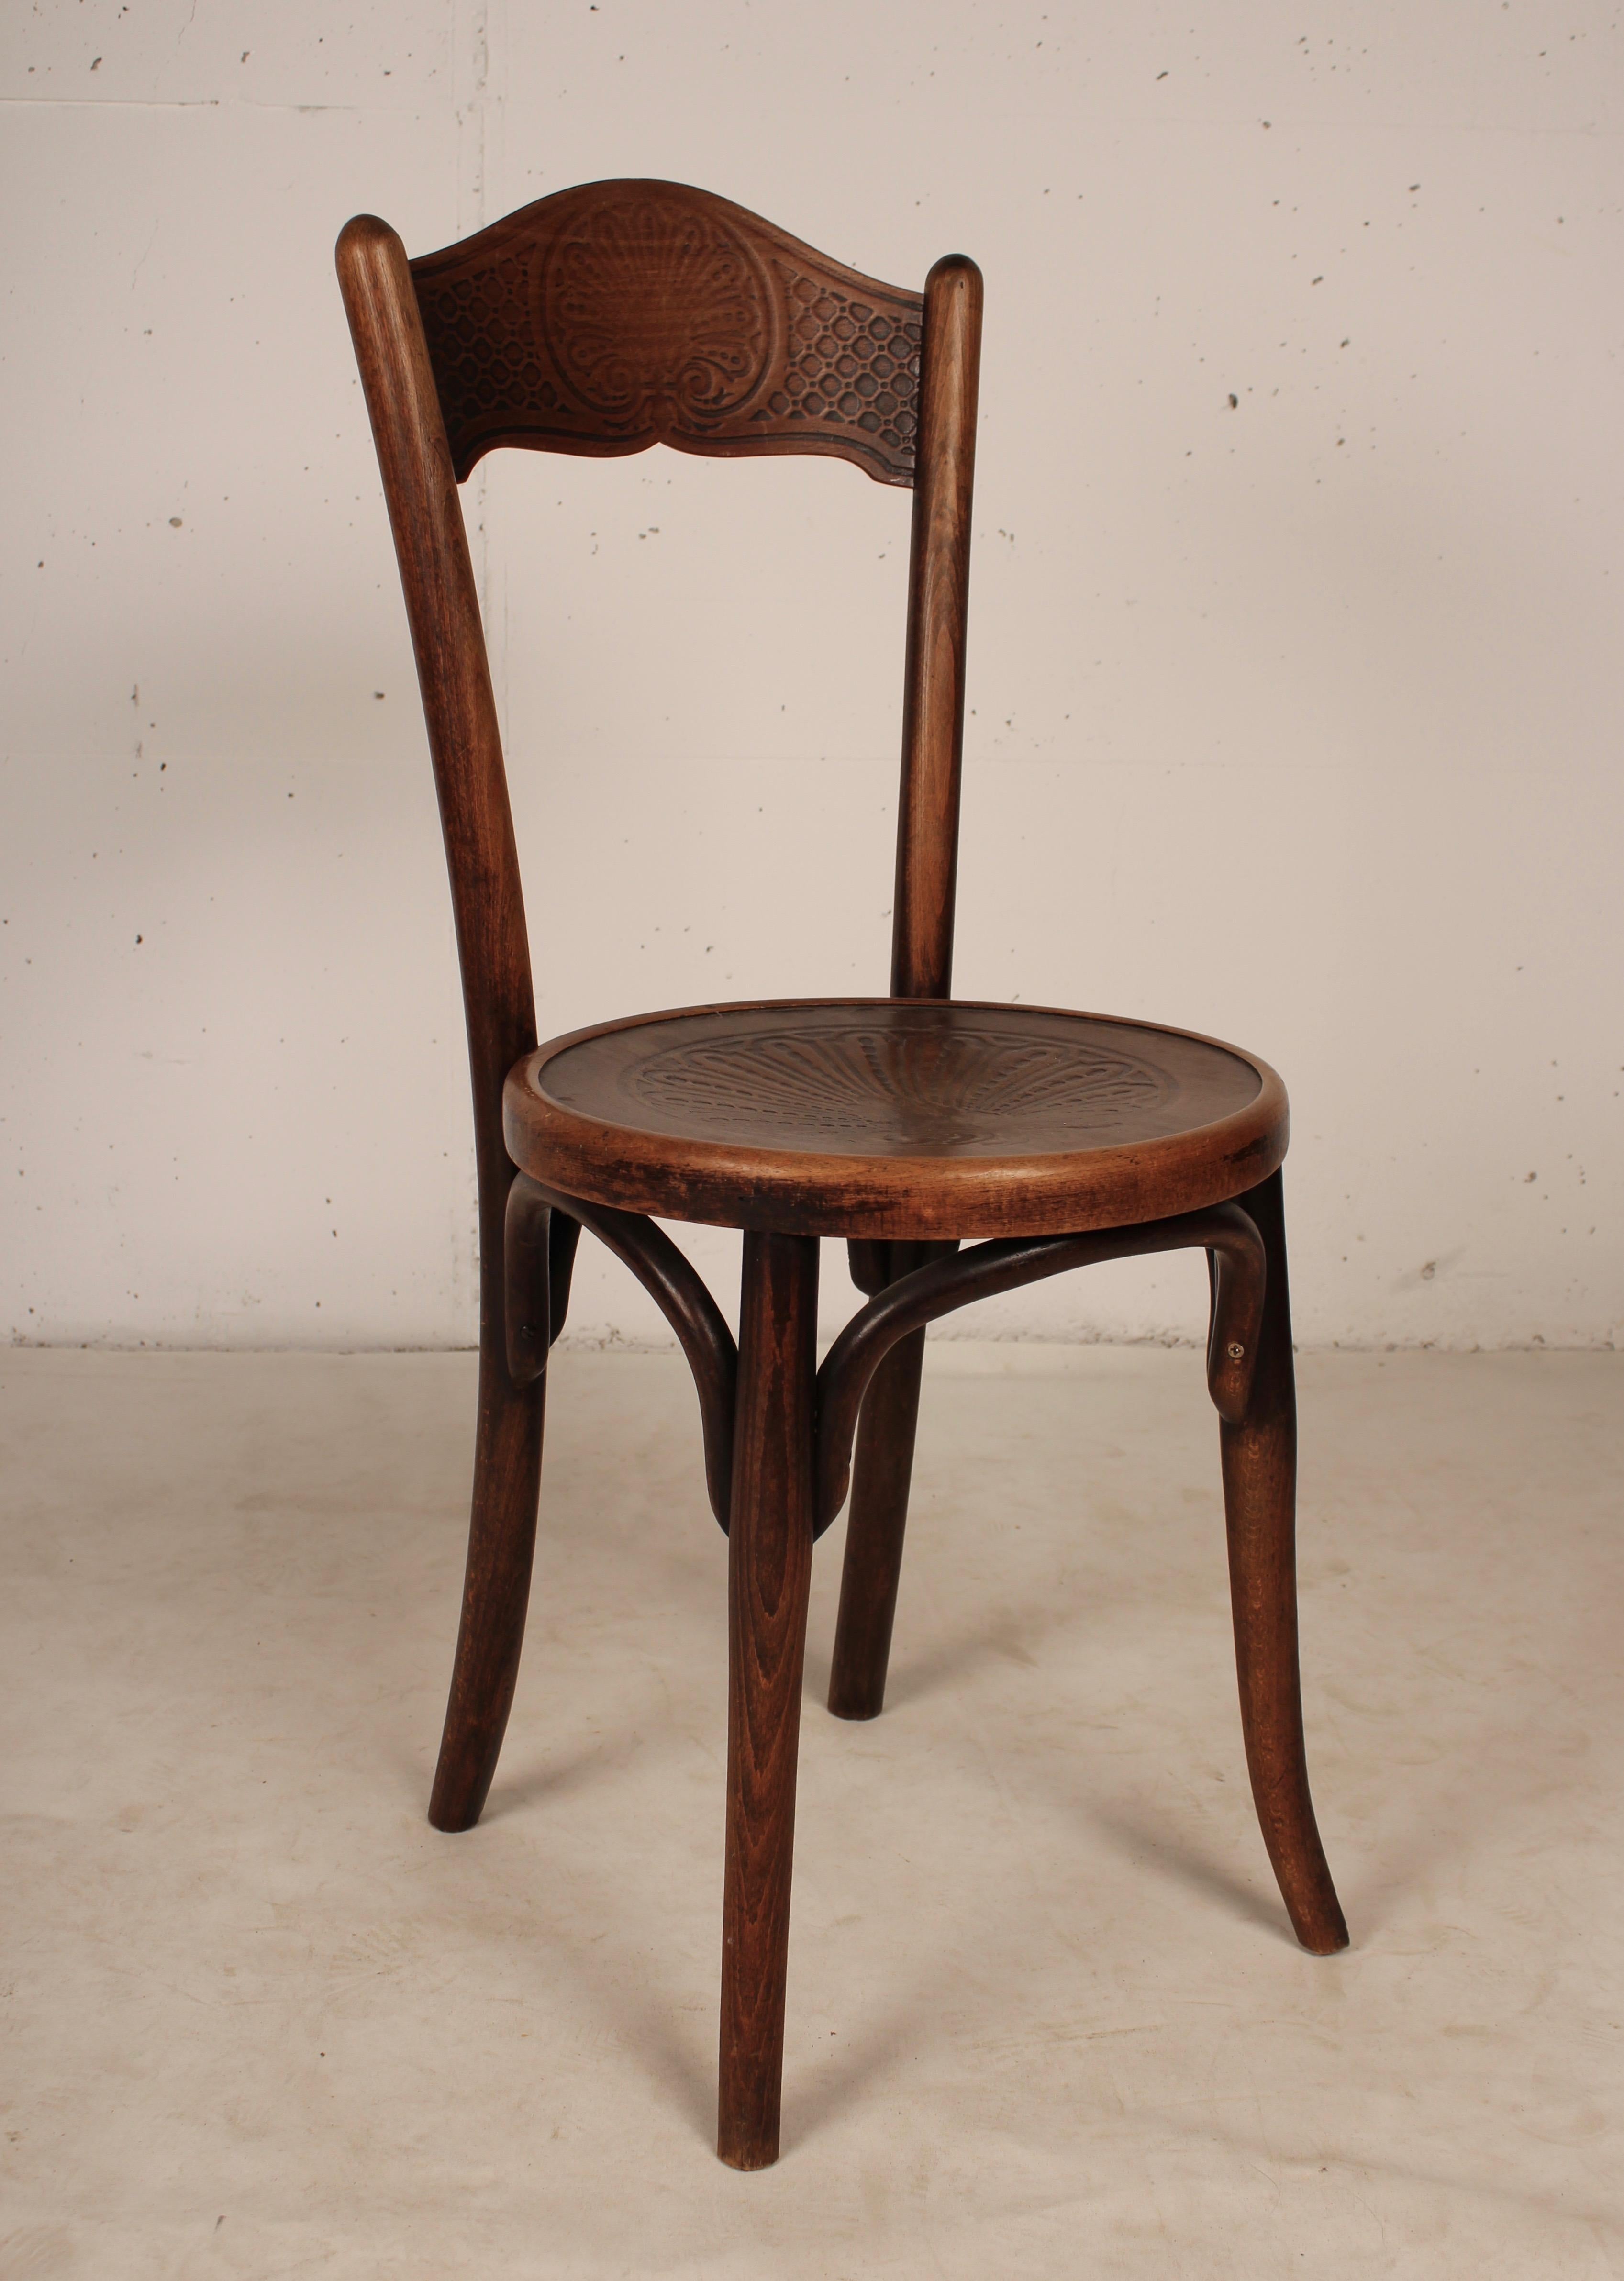 Set of 6 Bistro Chairs by Jacob & Josef Kohn, 1890 Austro-Hungarian Empire For Sale 9